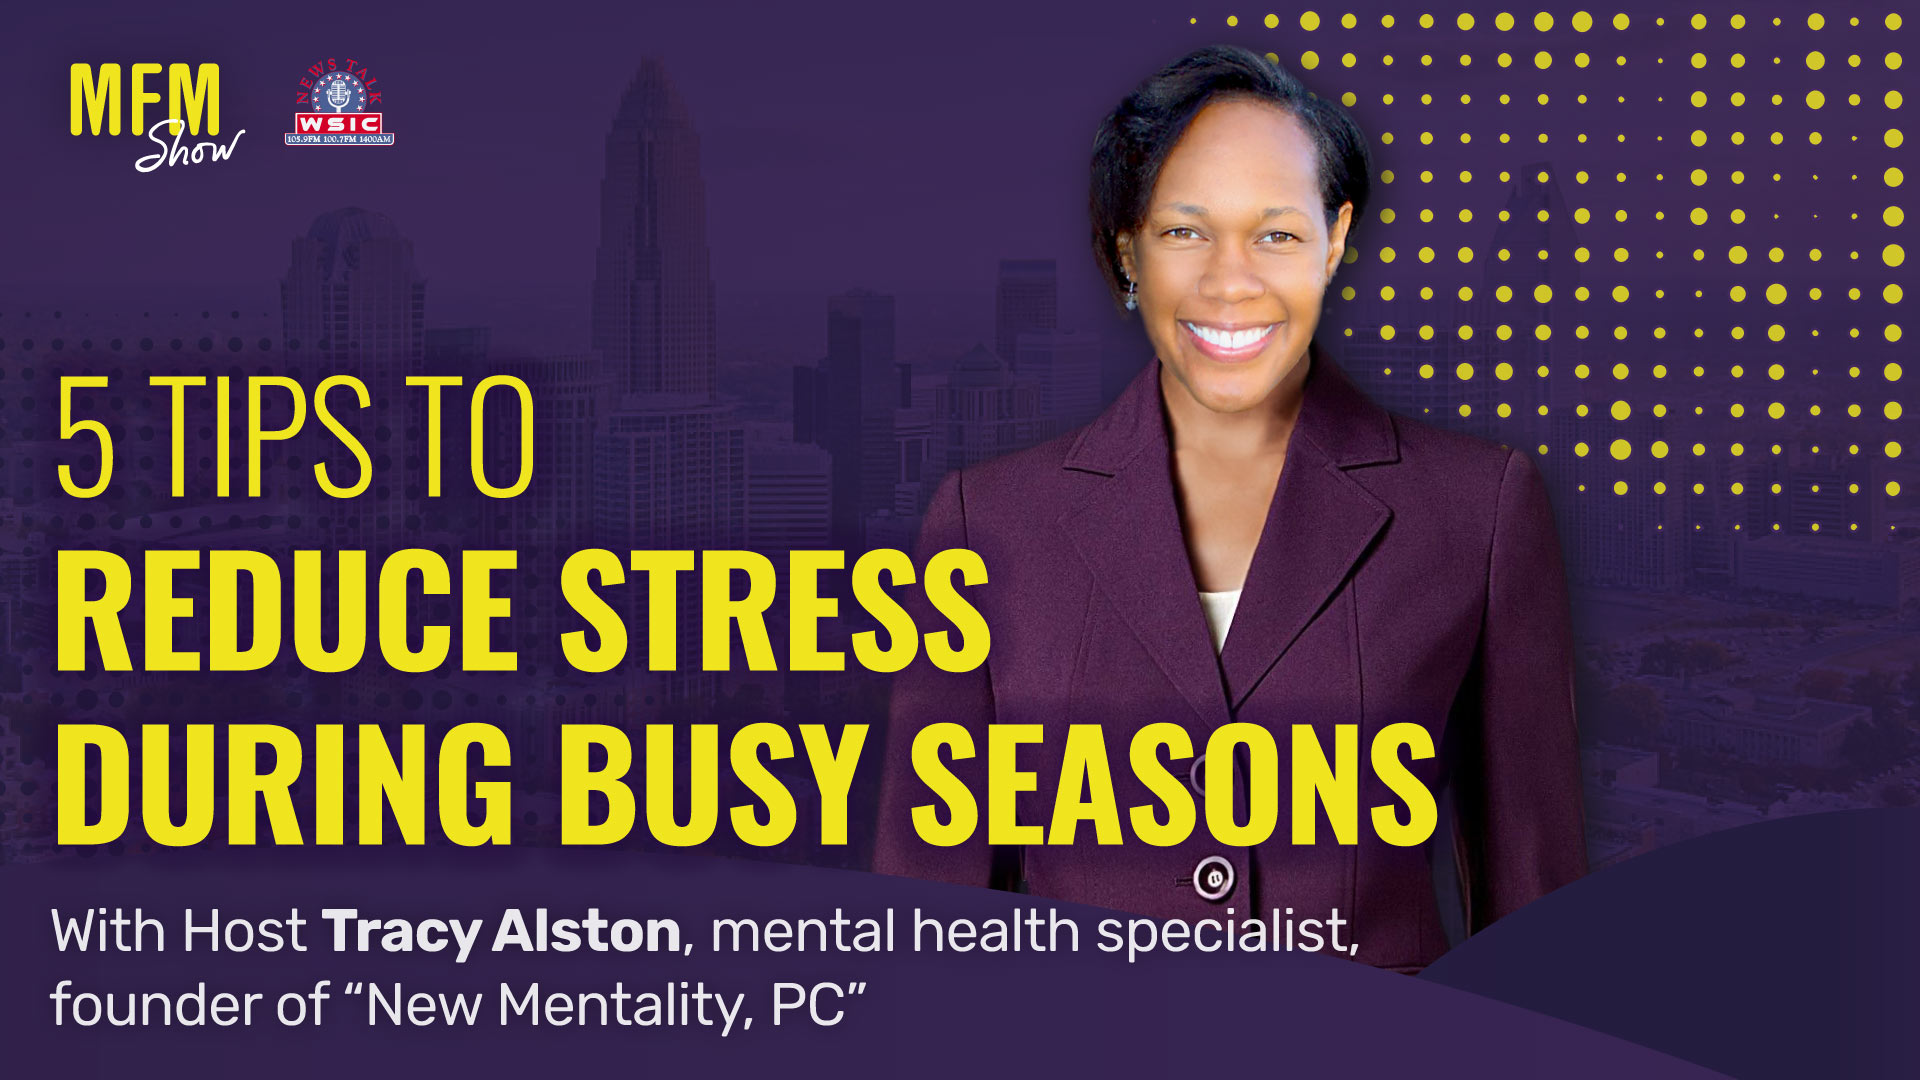 5 tips to reduce stress during busy seasons